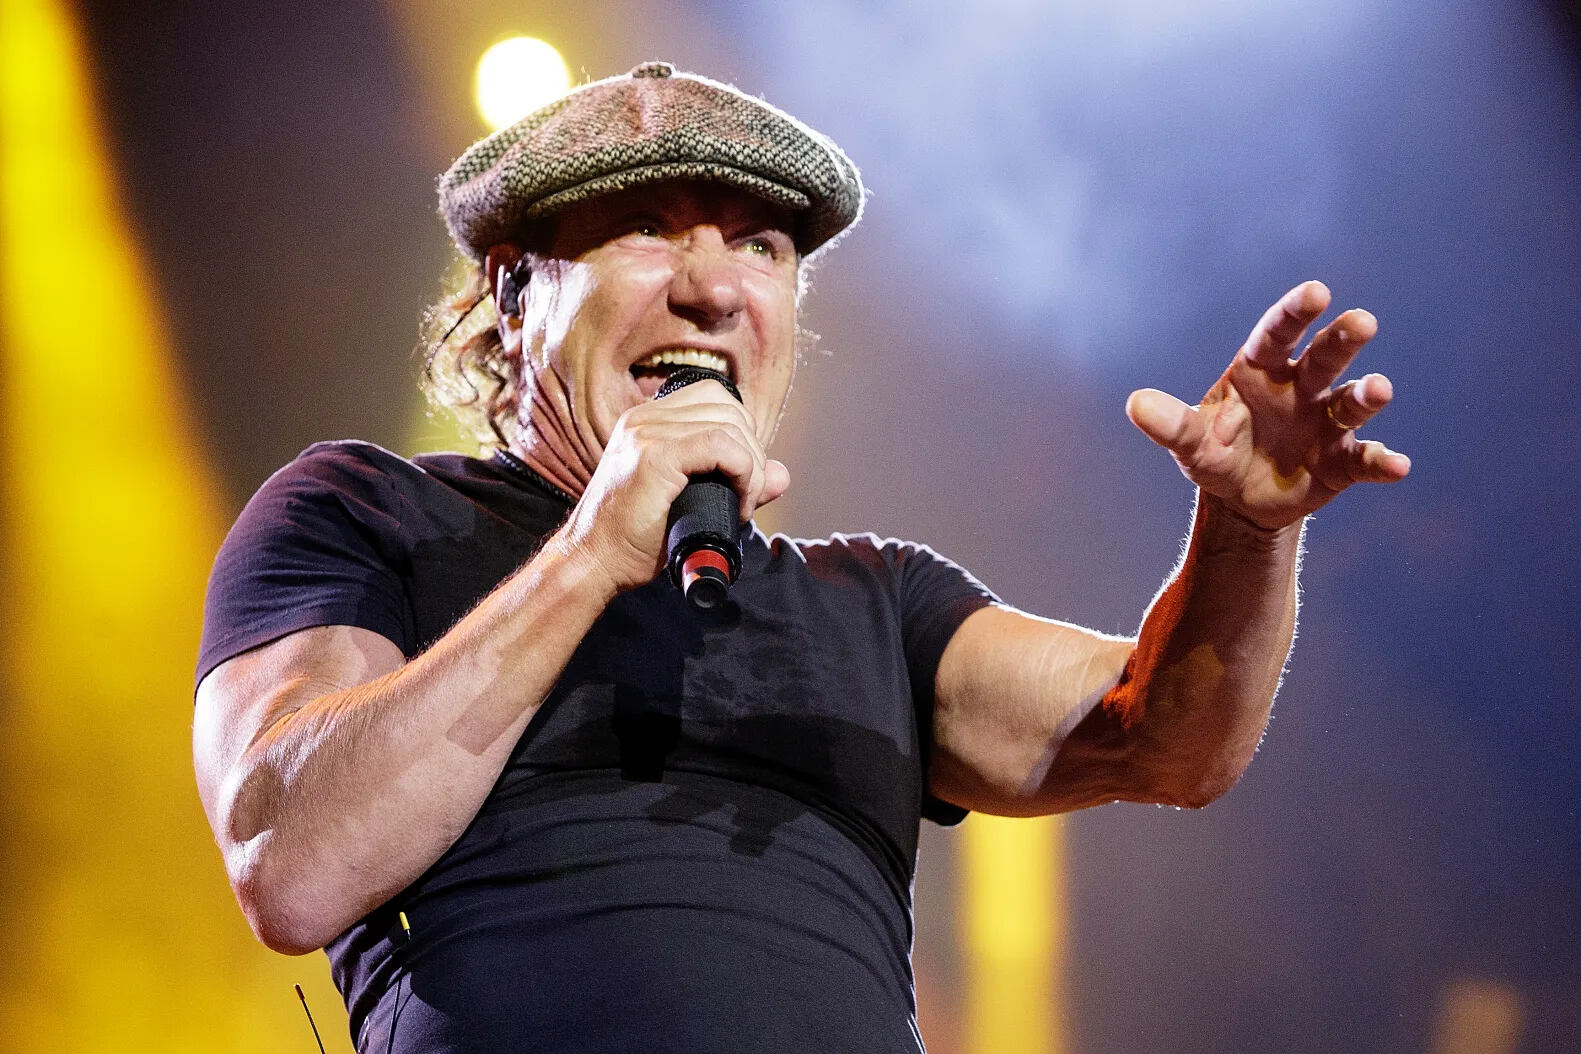 Who Is The Lead Singer Of AC/DC